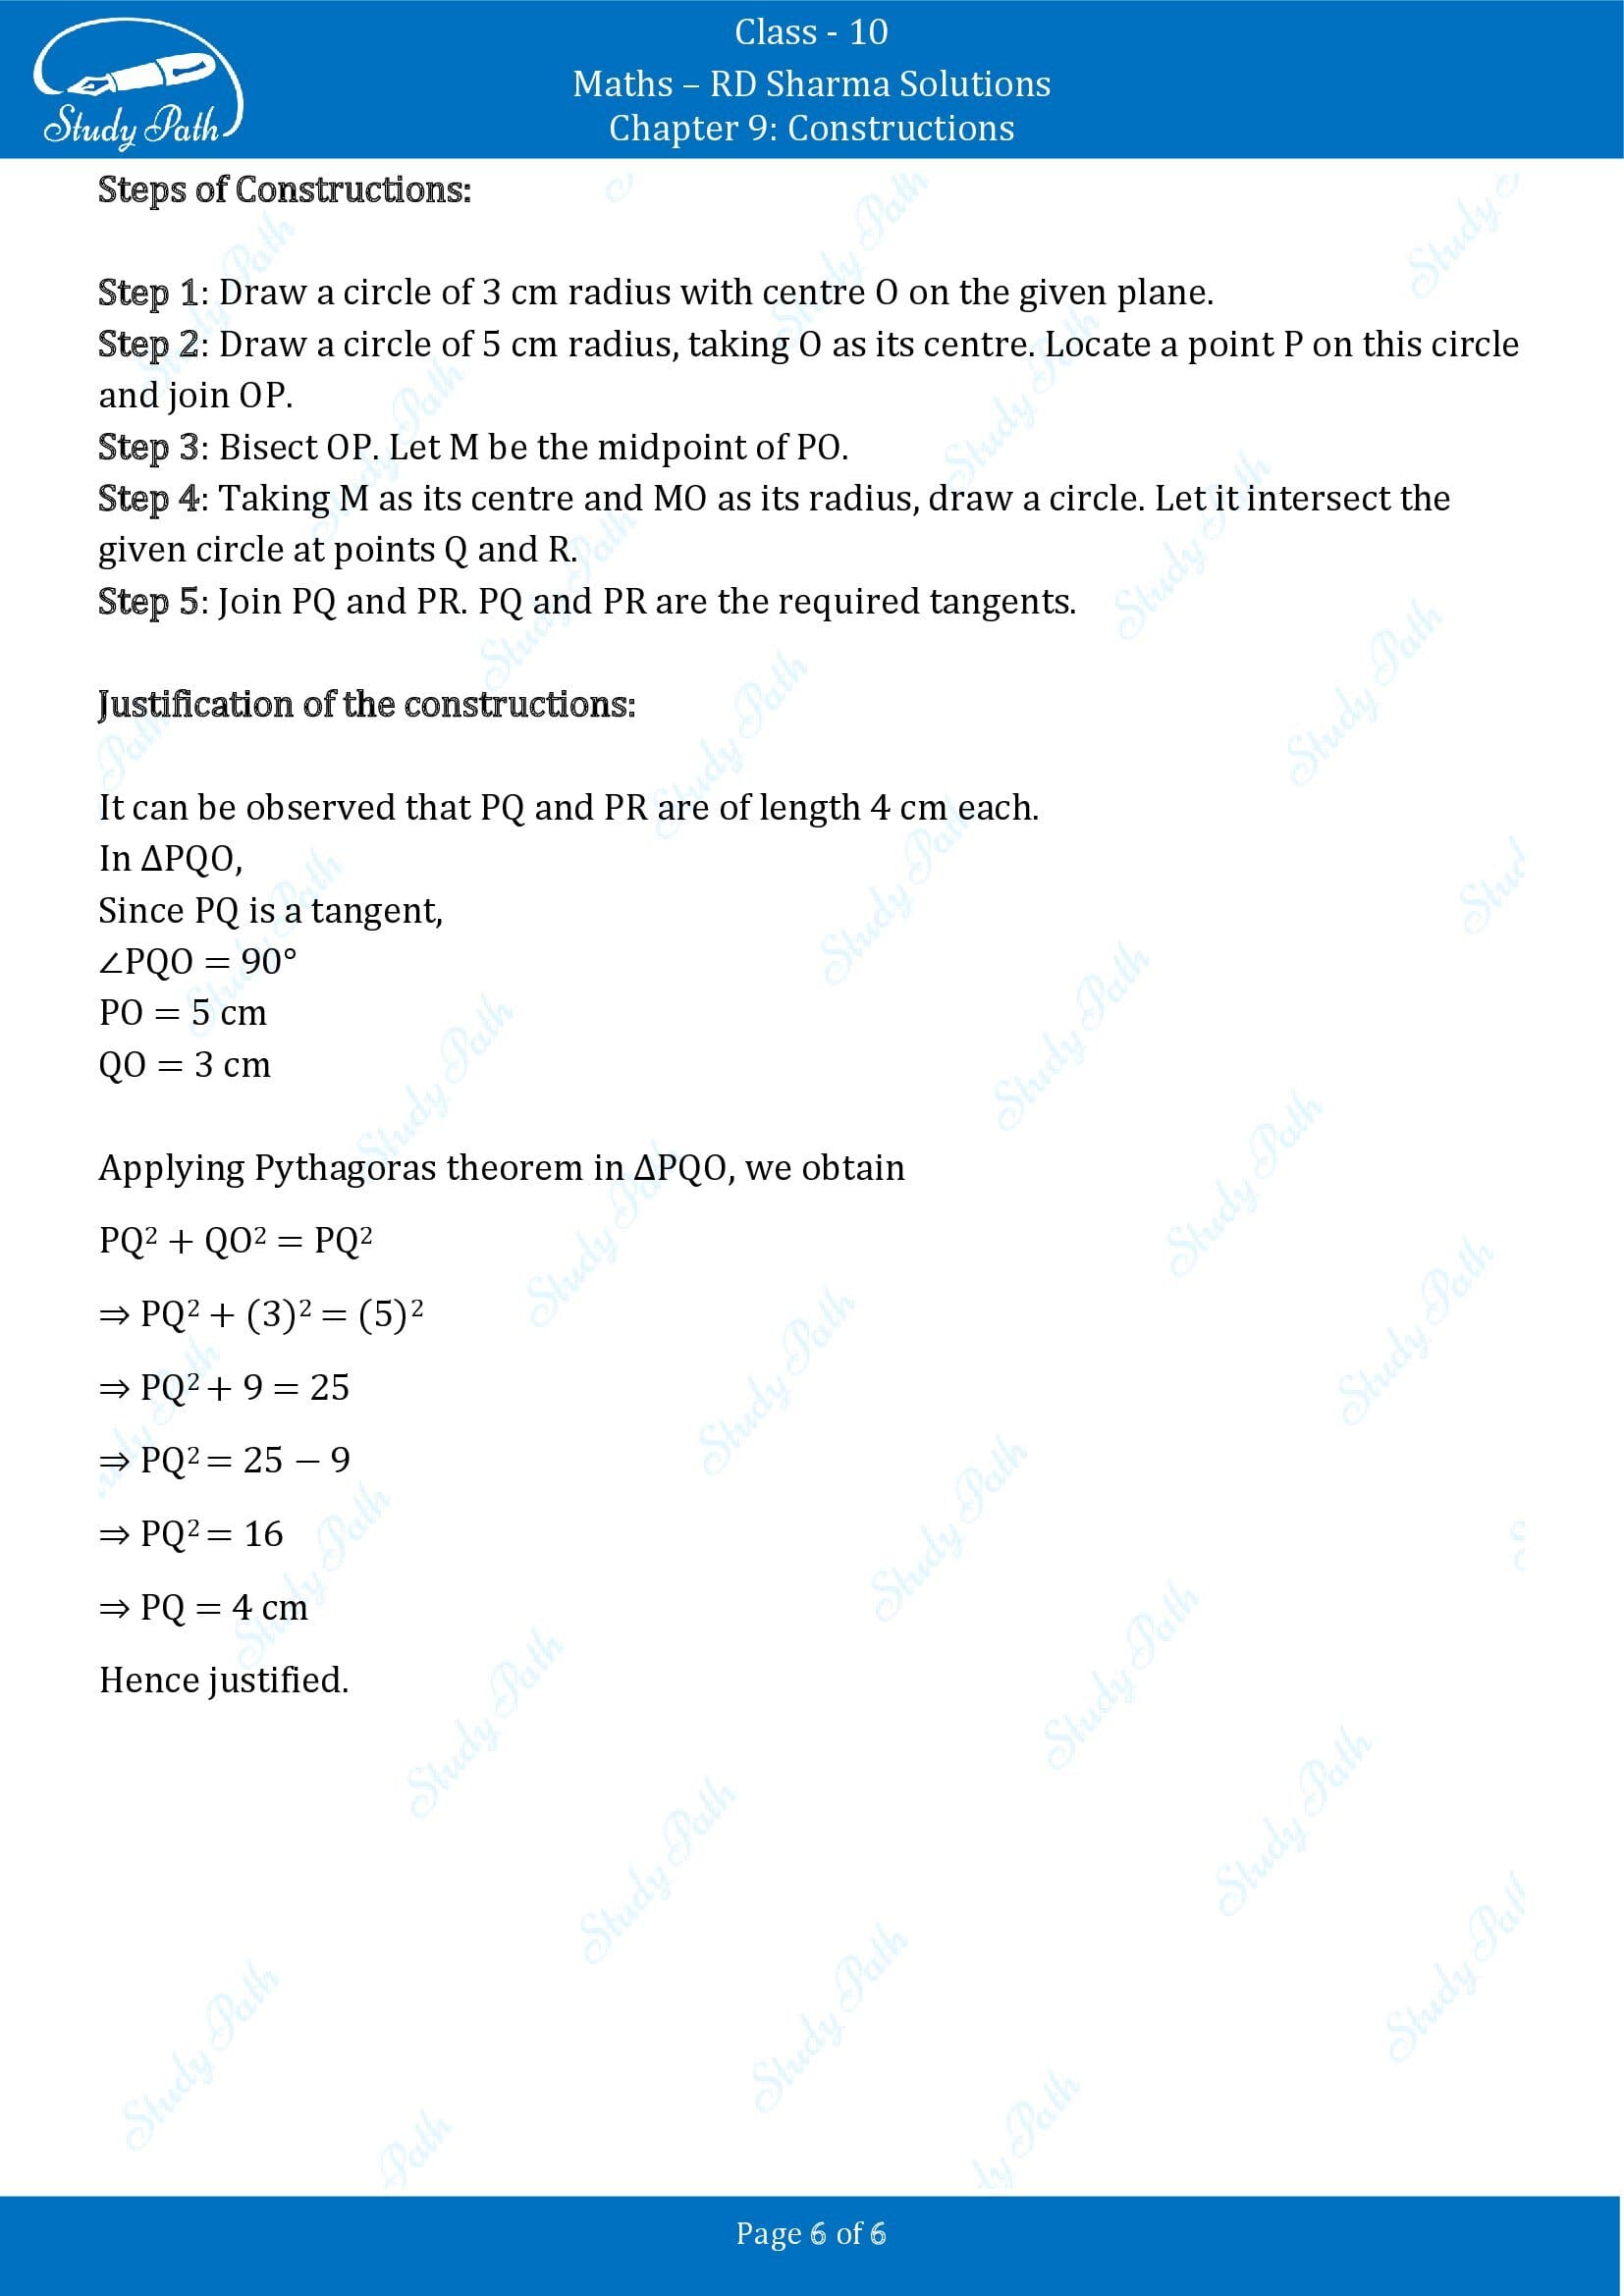 RD Sharma Solutions Class 10 Chapter 9 Constructions Exercise 9.3 00006